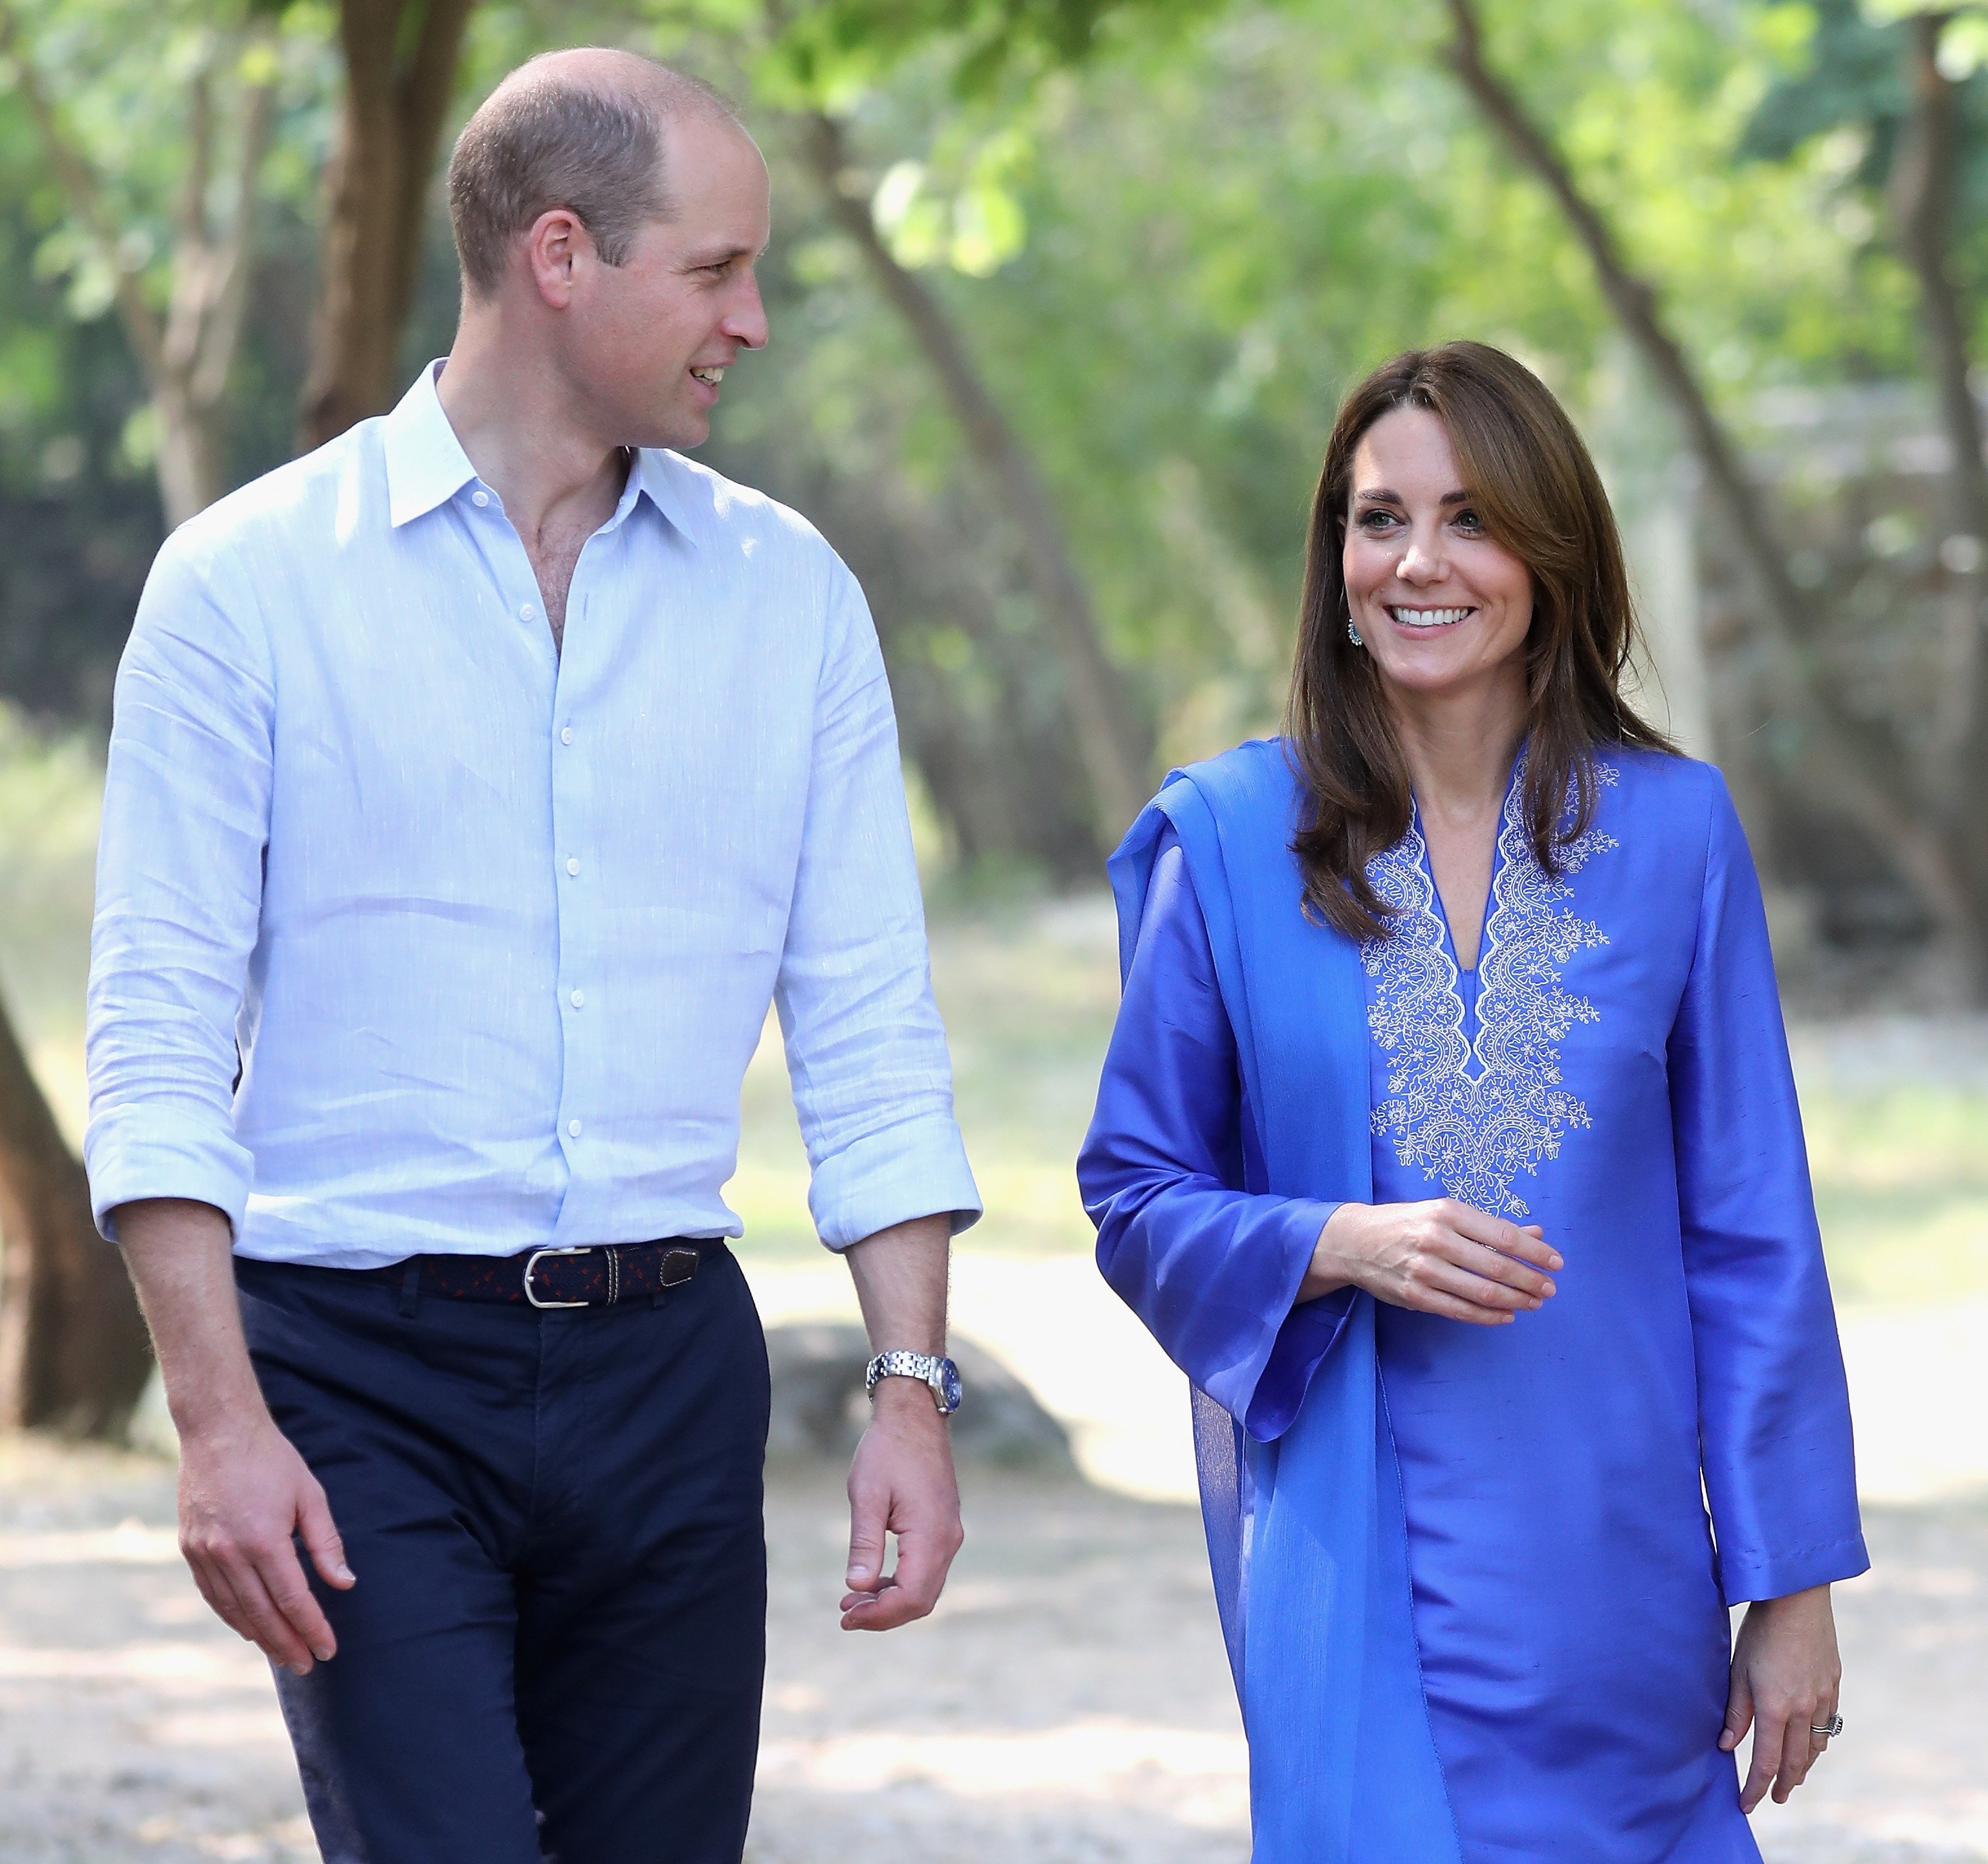 Prince William and Catherine at the Margallah Hills National Park on October 15, 2019, in Islamabad, Pakistan. | Source: Getty Images